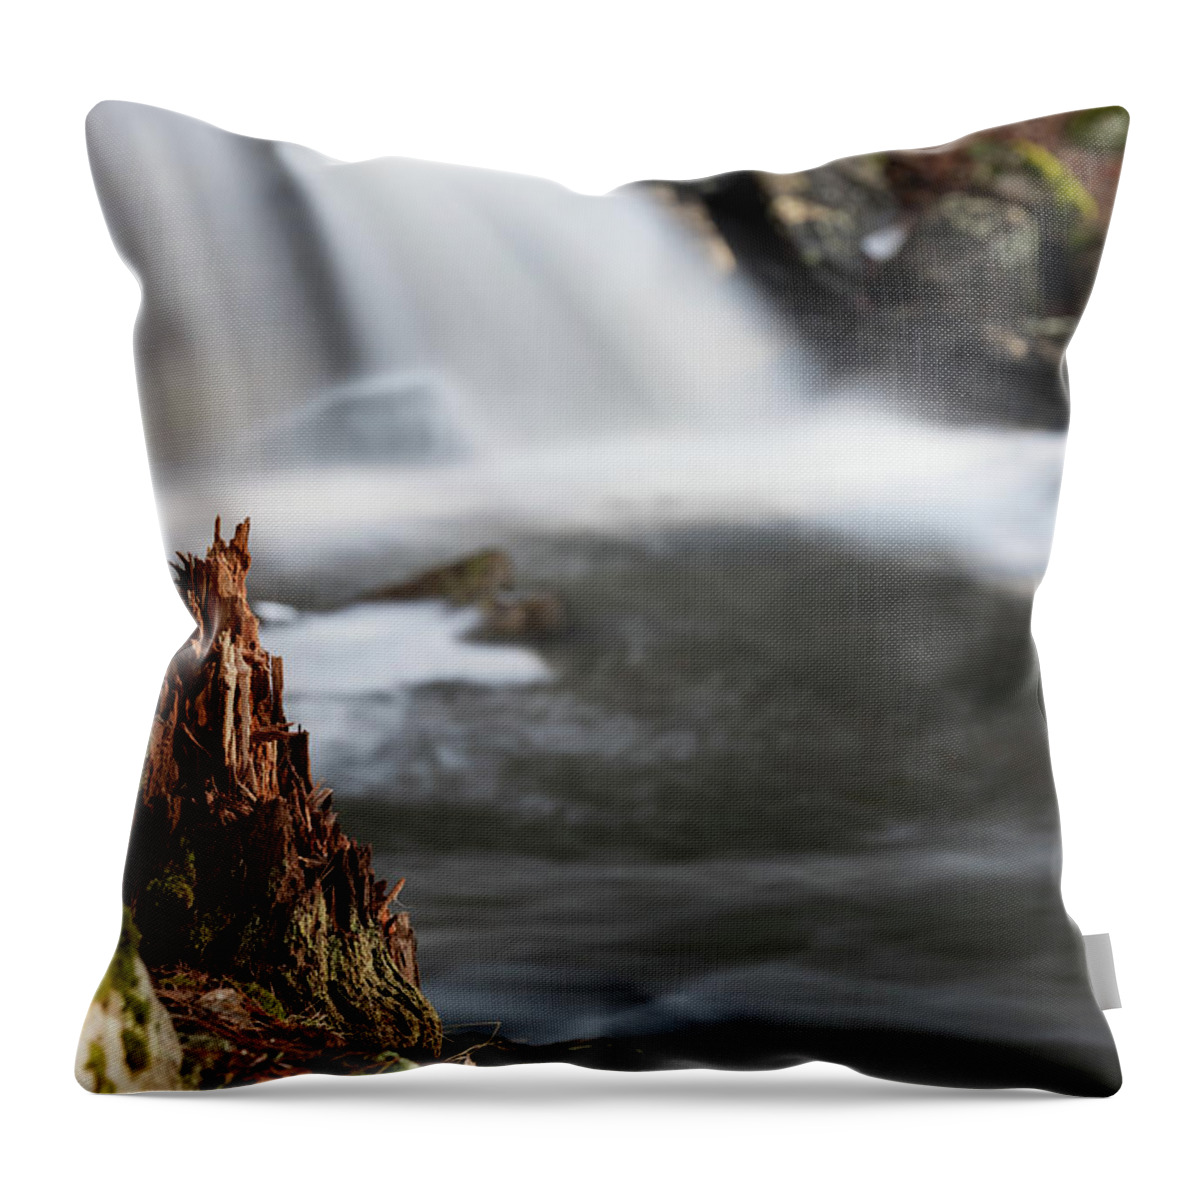 Secret Waterfall Waterfalls Stump Tree Broken Bokeh Outside Outdoors Nature Natural Ma Mass Massachusetts Rutland Long Exposure Brian Hale Brianhalephoto Newengland New England Woods Secluded Throw Pillow featuring the photograph Stumped at The Secret Waterfall by Brian Hale